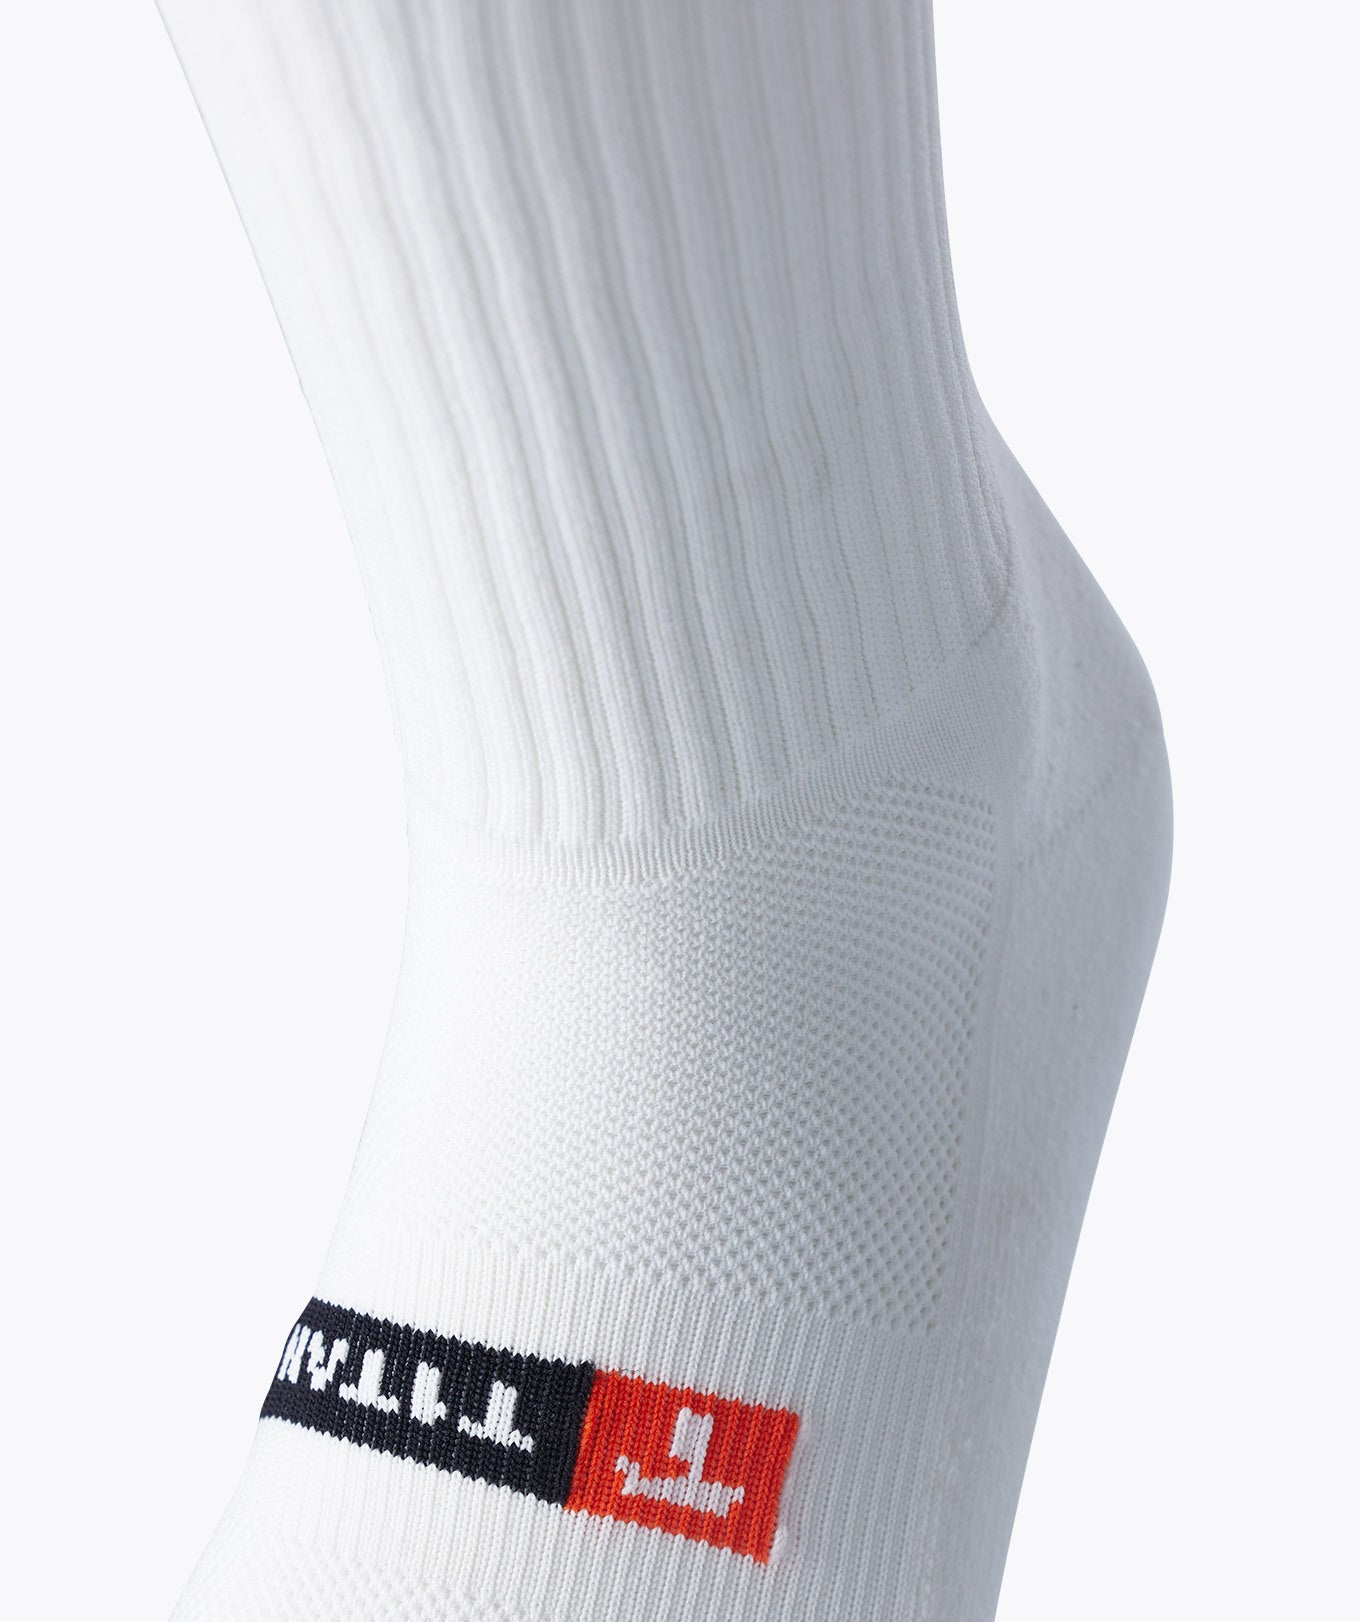 T1TAN SpeedGrip Socks - show everyone that you are a real T1TAN!